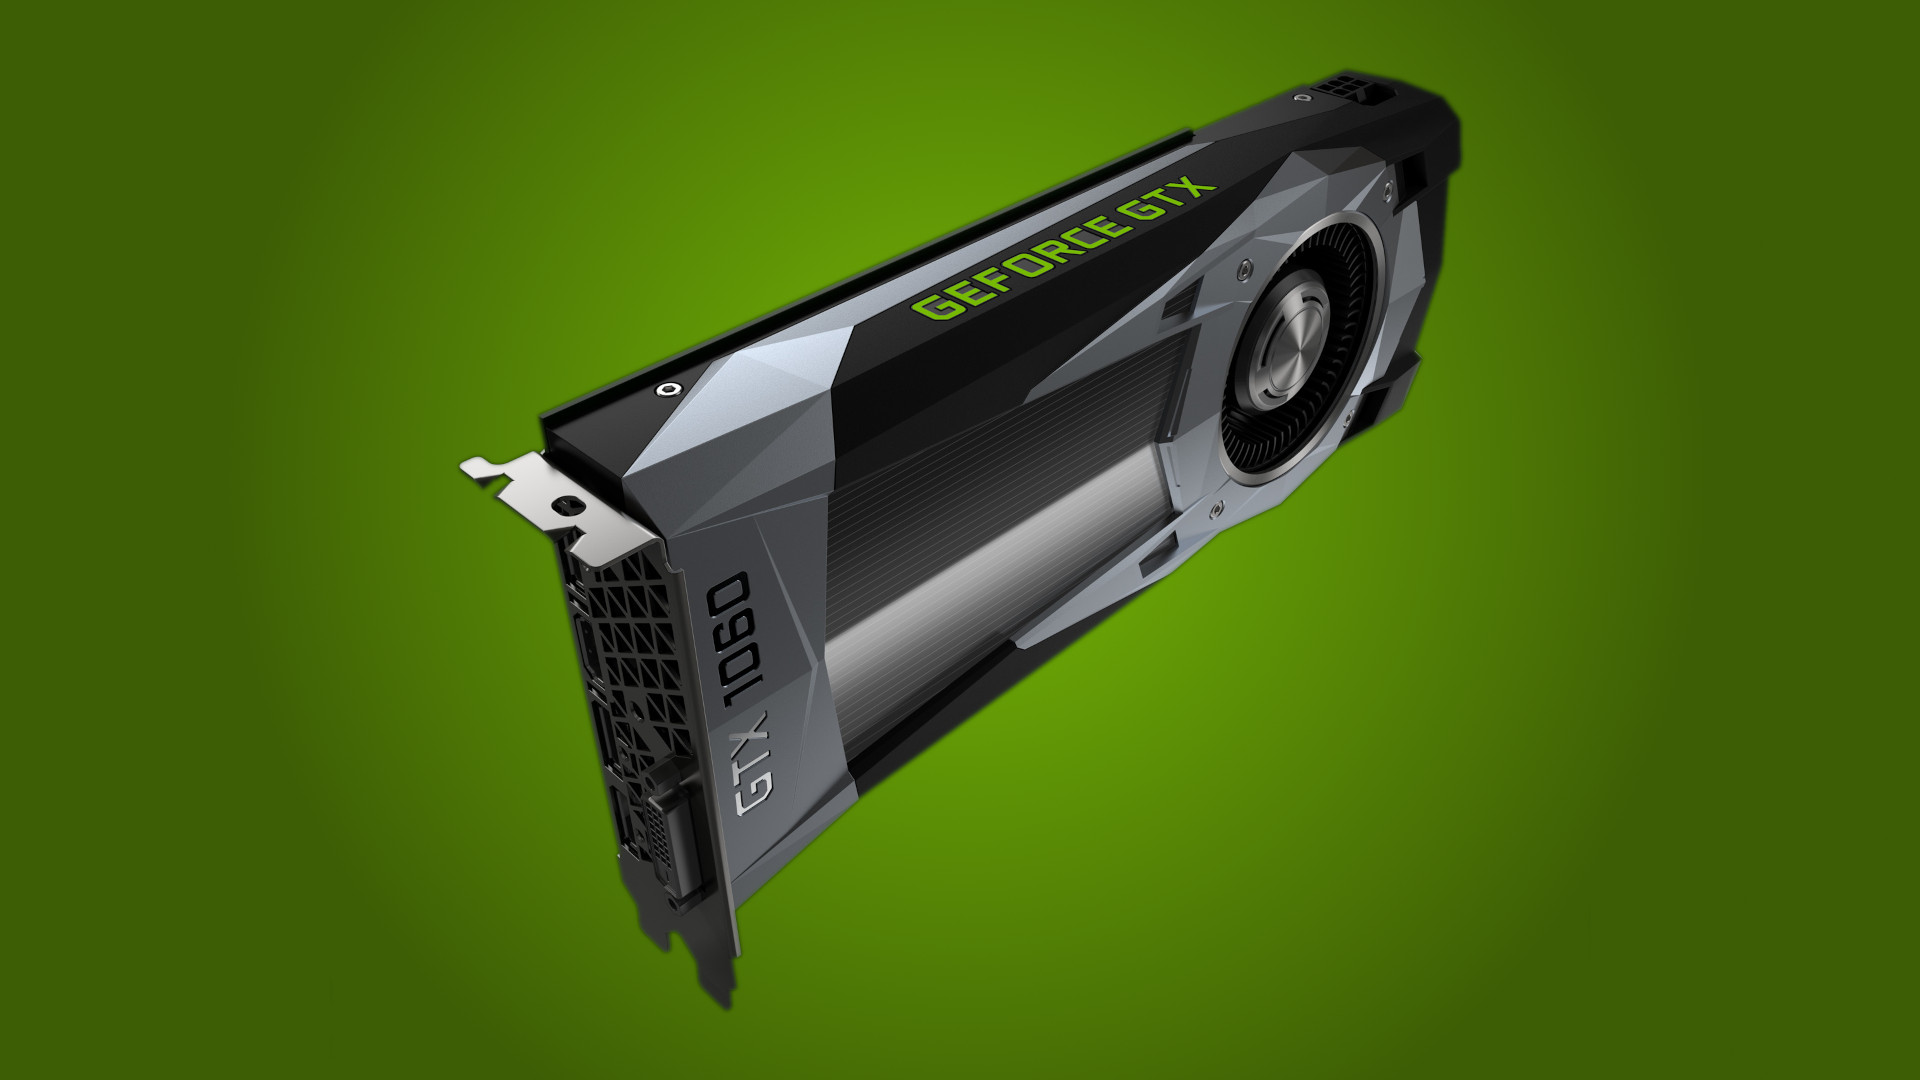 The GeForce GTX 1060 Founders Edition graphics card, against a two-tone green background